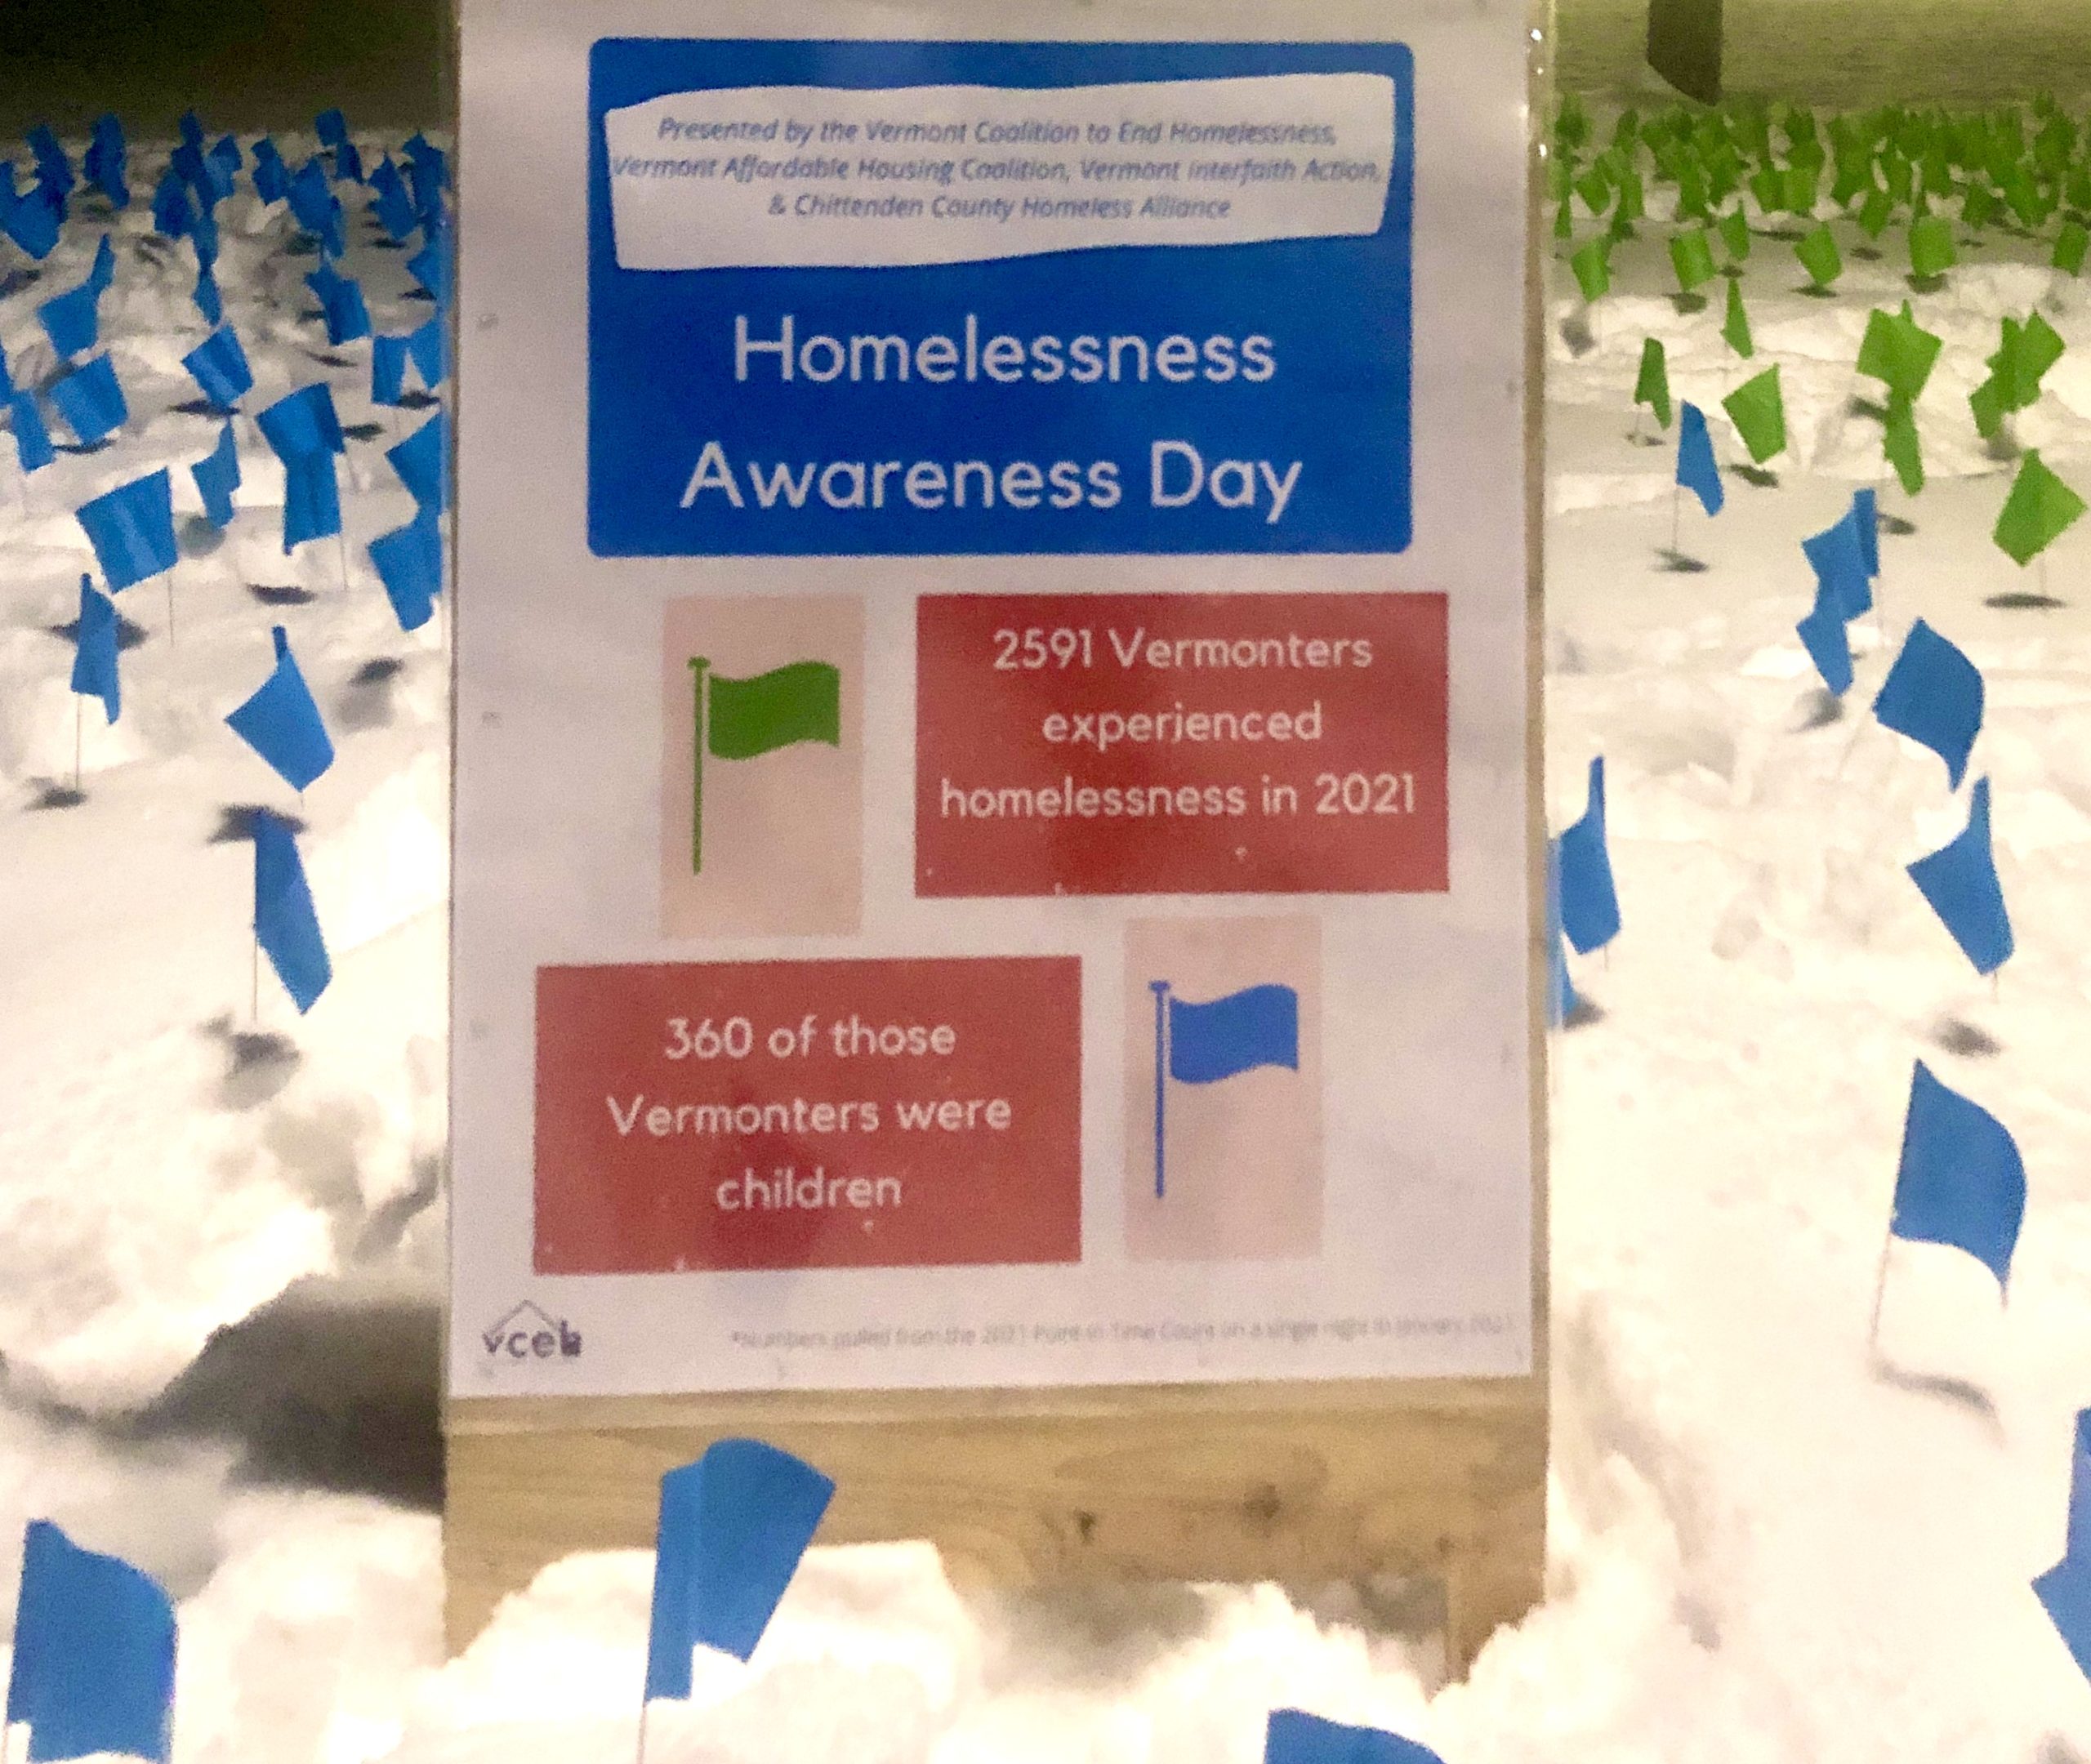 Homelessness Awareness Day 2022 Vermont Coalition to End Homelessness